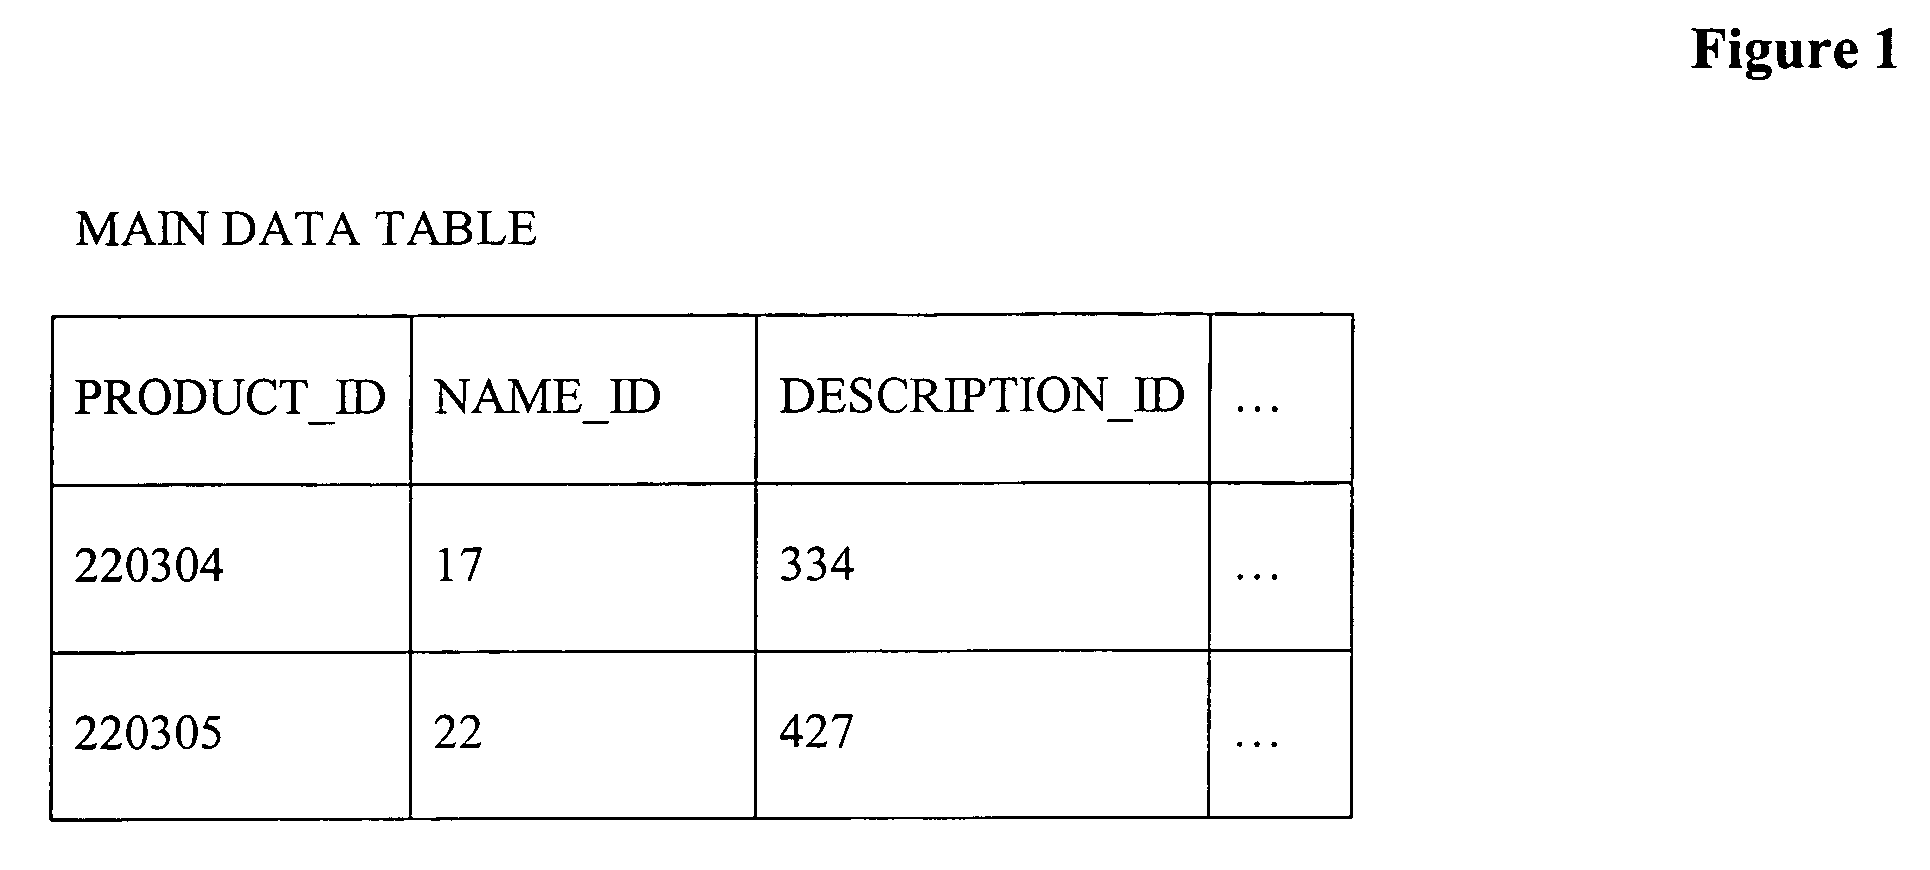 Method for utilizing a multi-layered data model to generate audience specific documents